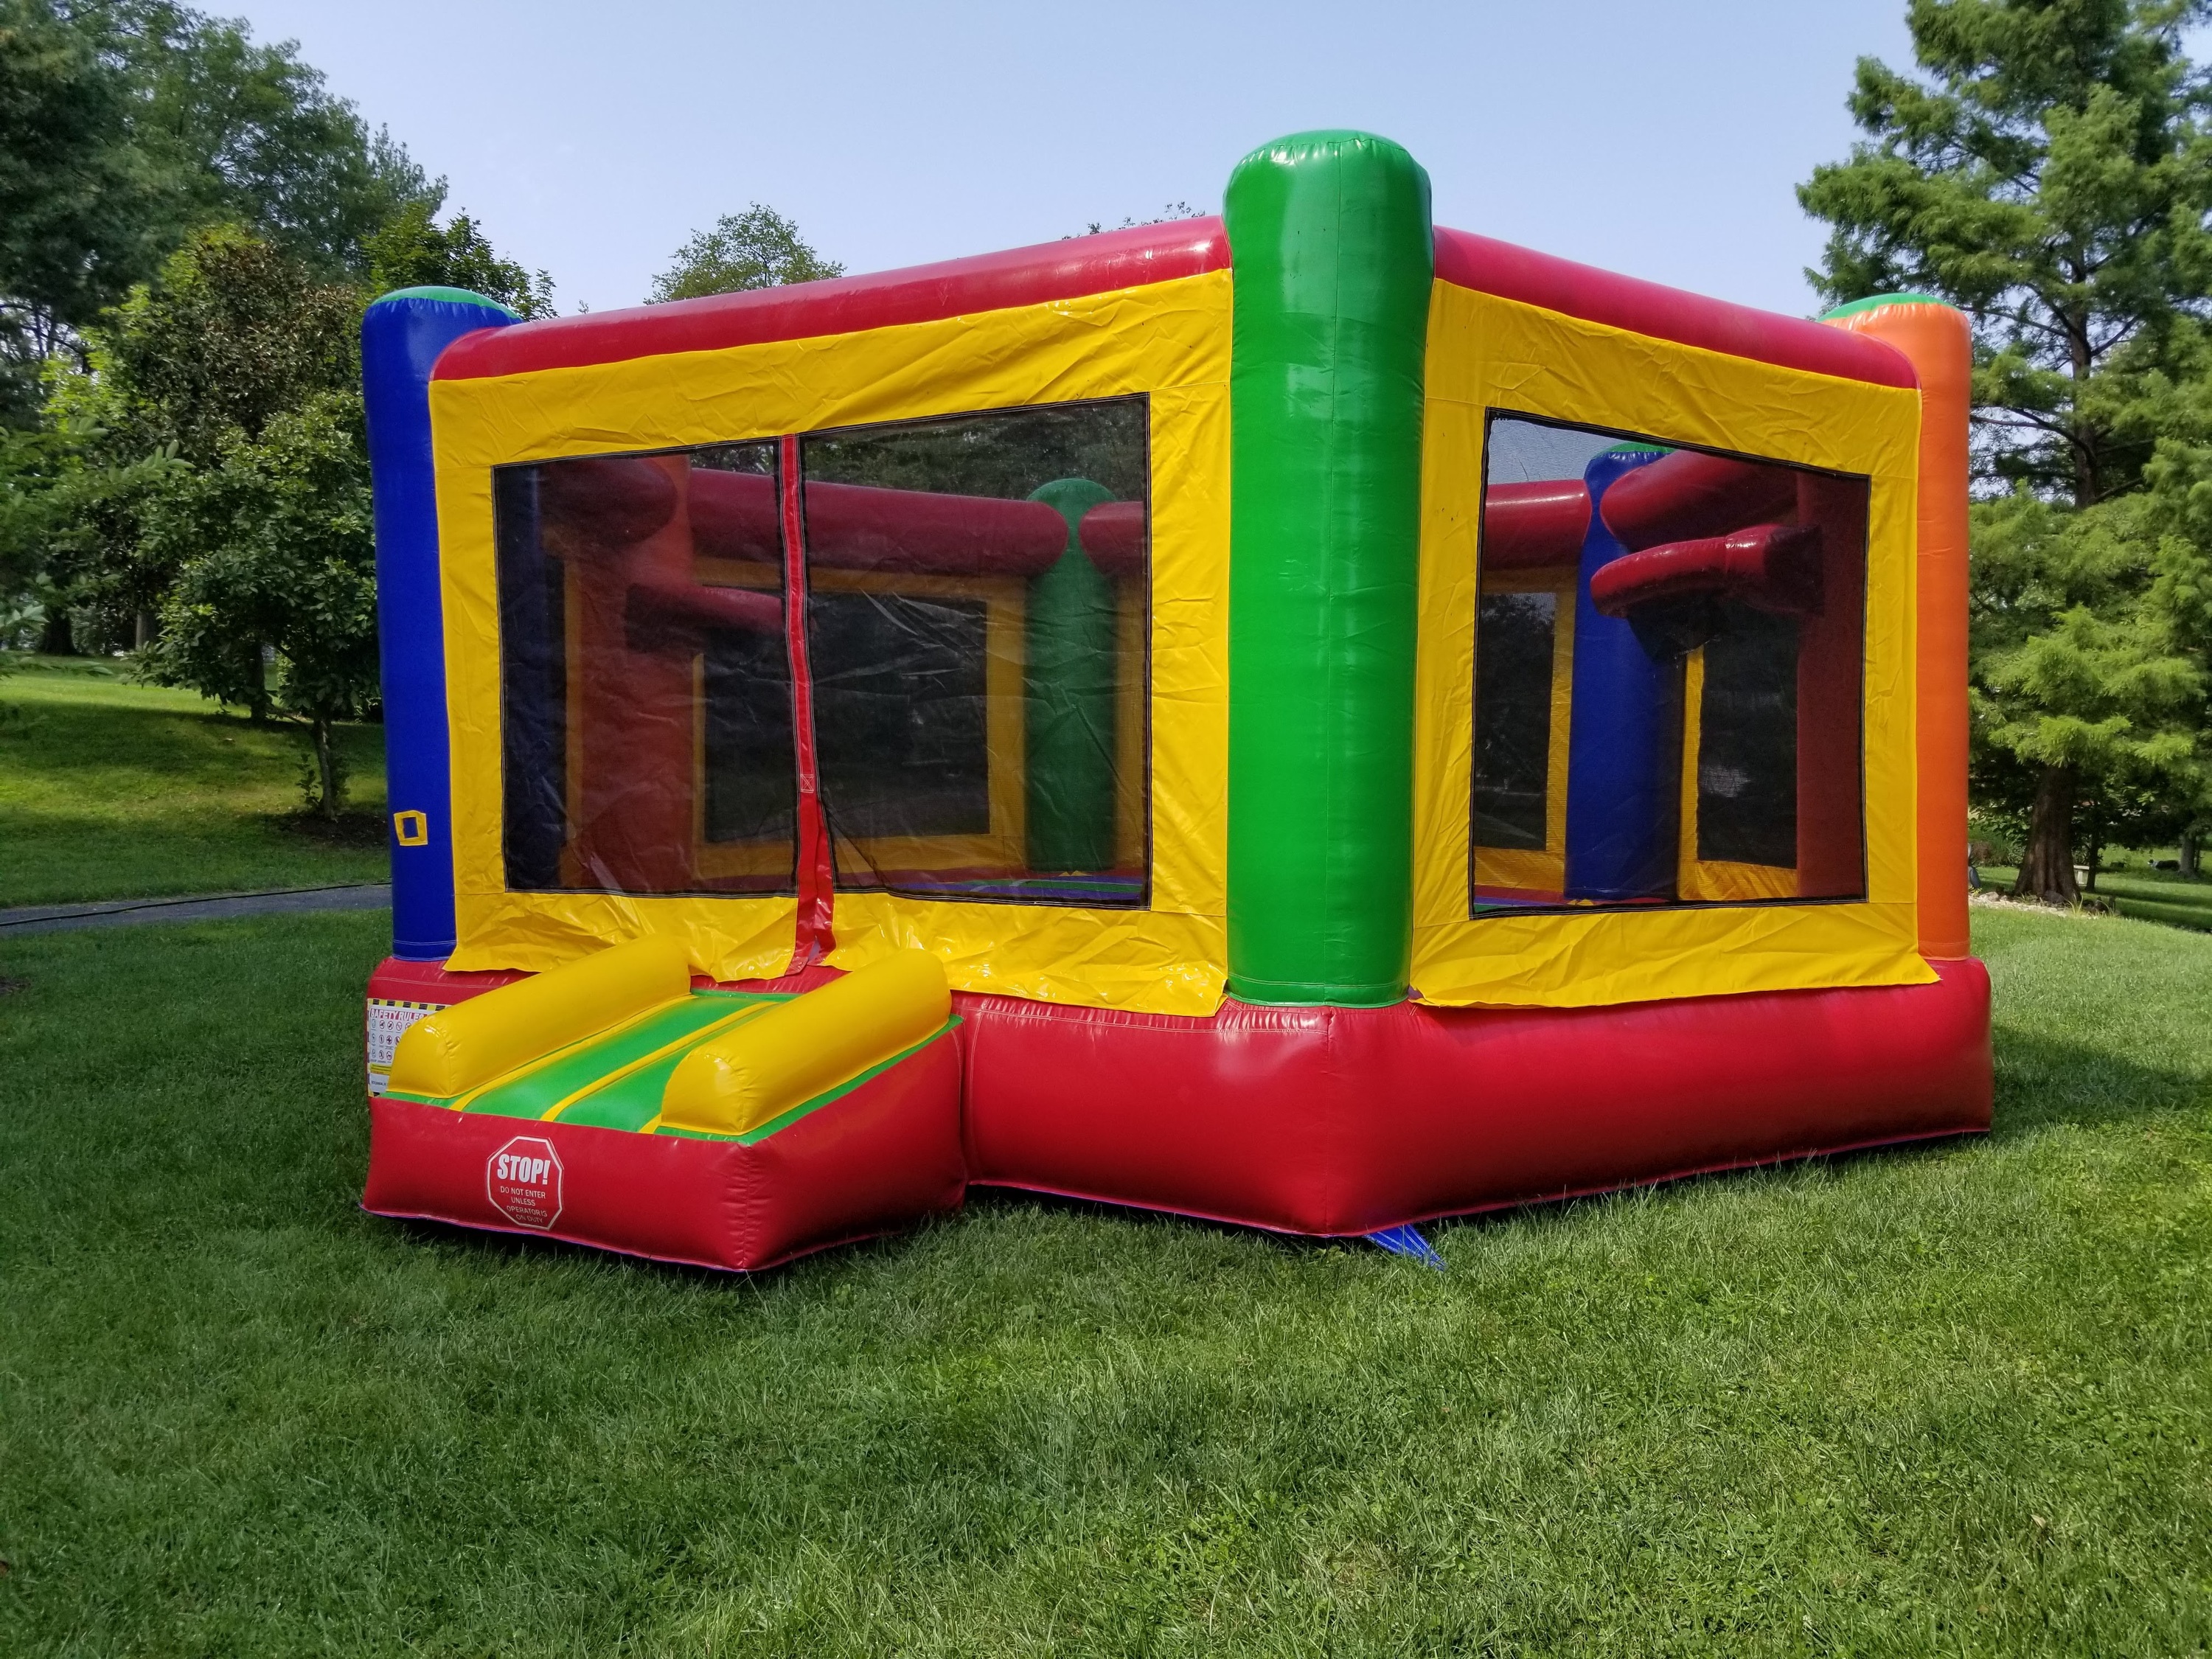 Adult inflatable rentals near St. Louis MO